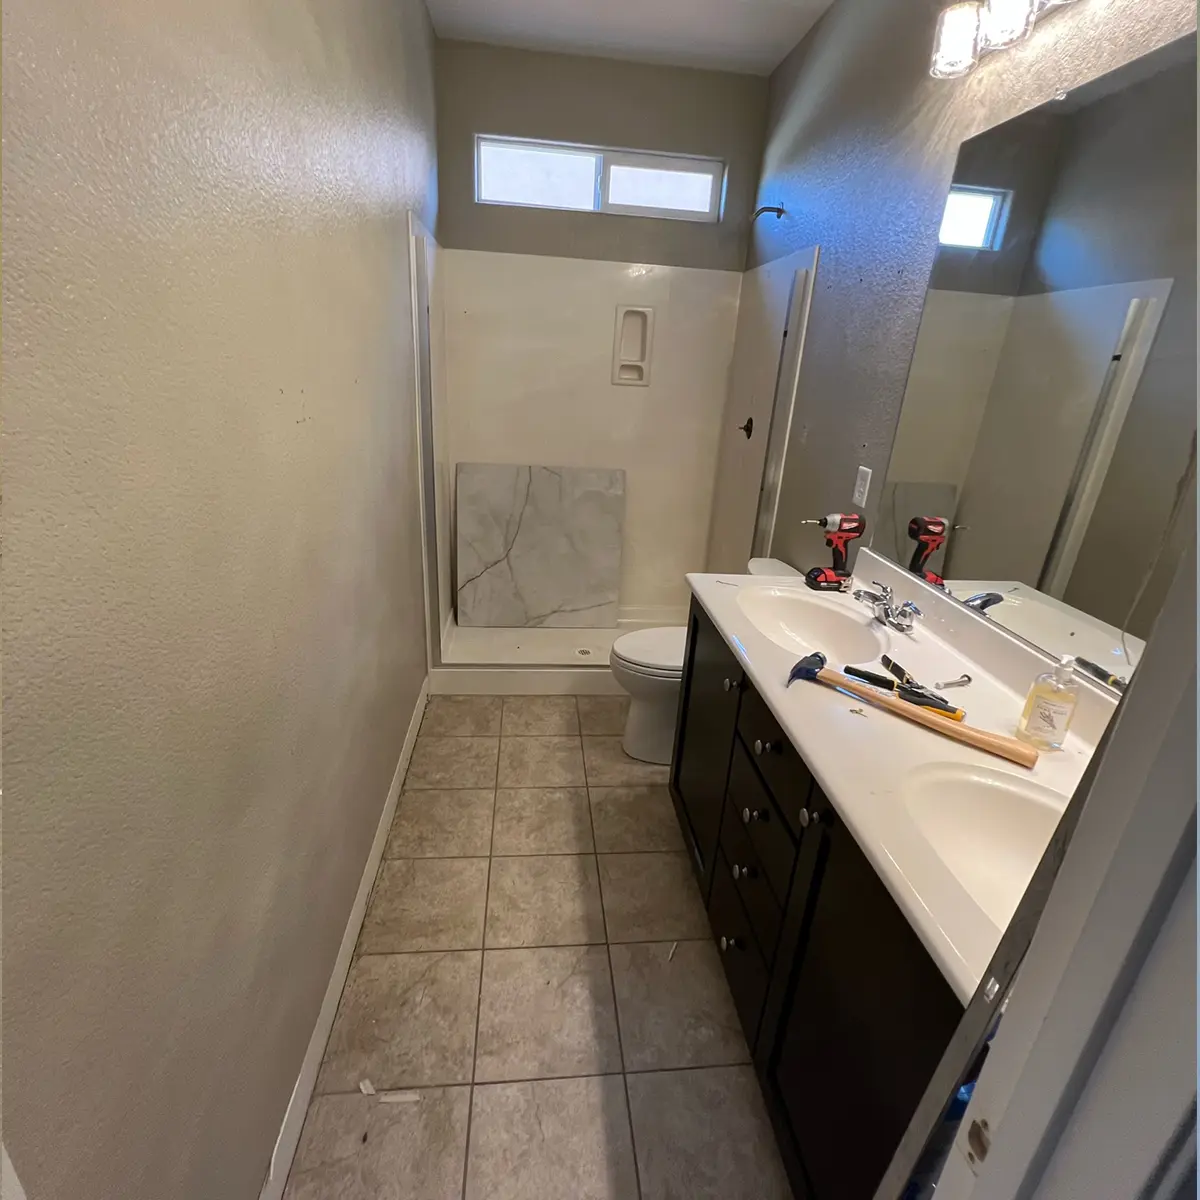 A double vanity painted black, tile flooring, and a walk-in shower in progress